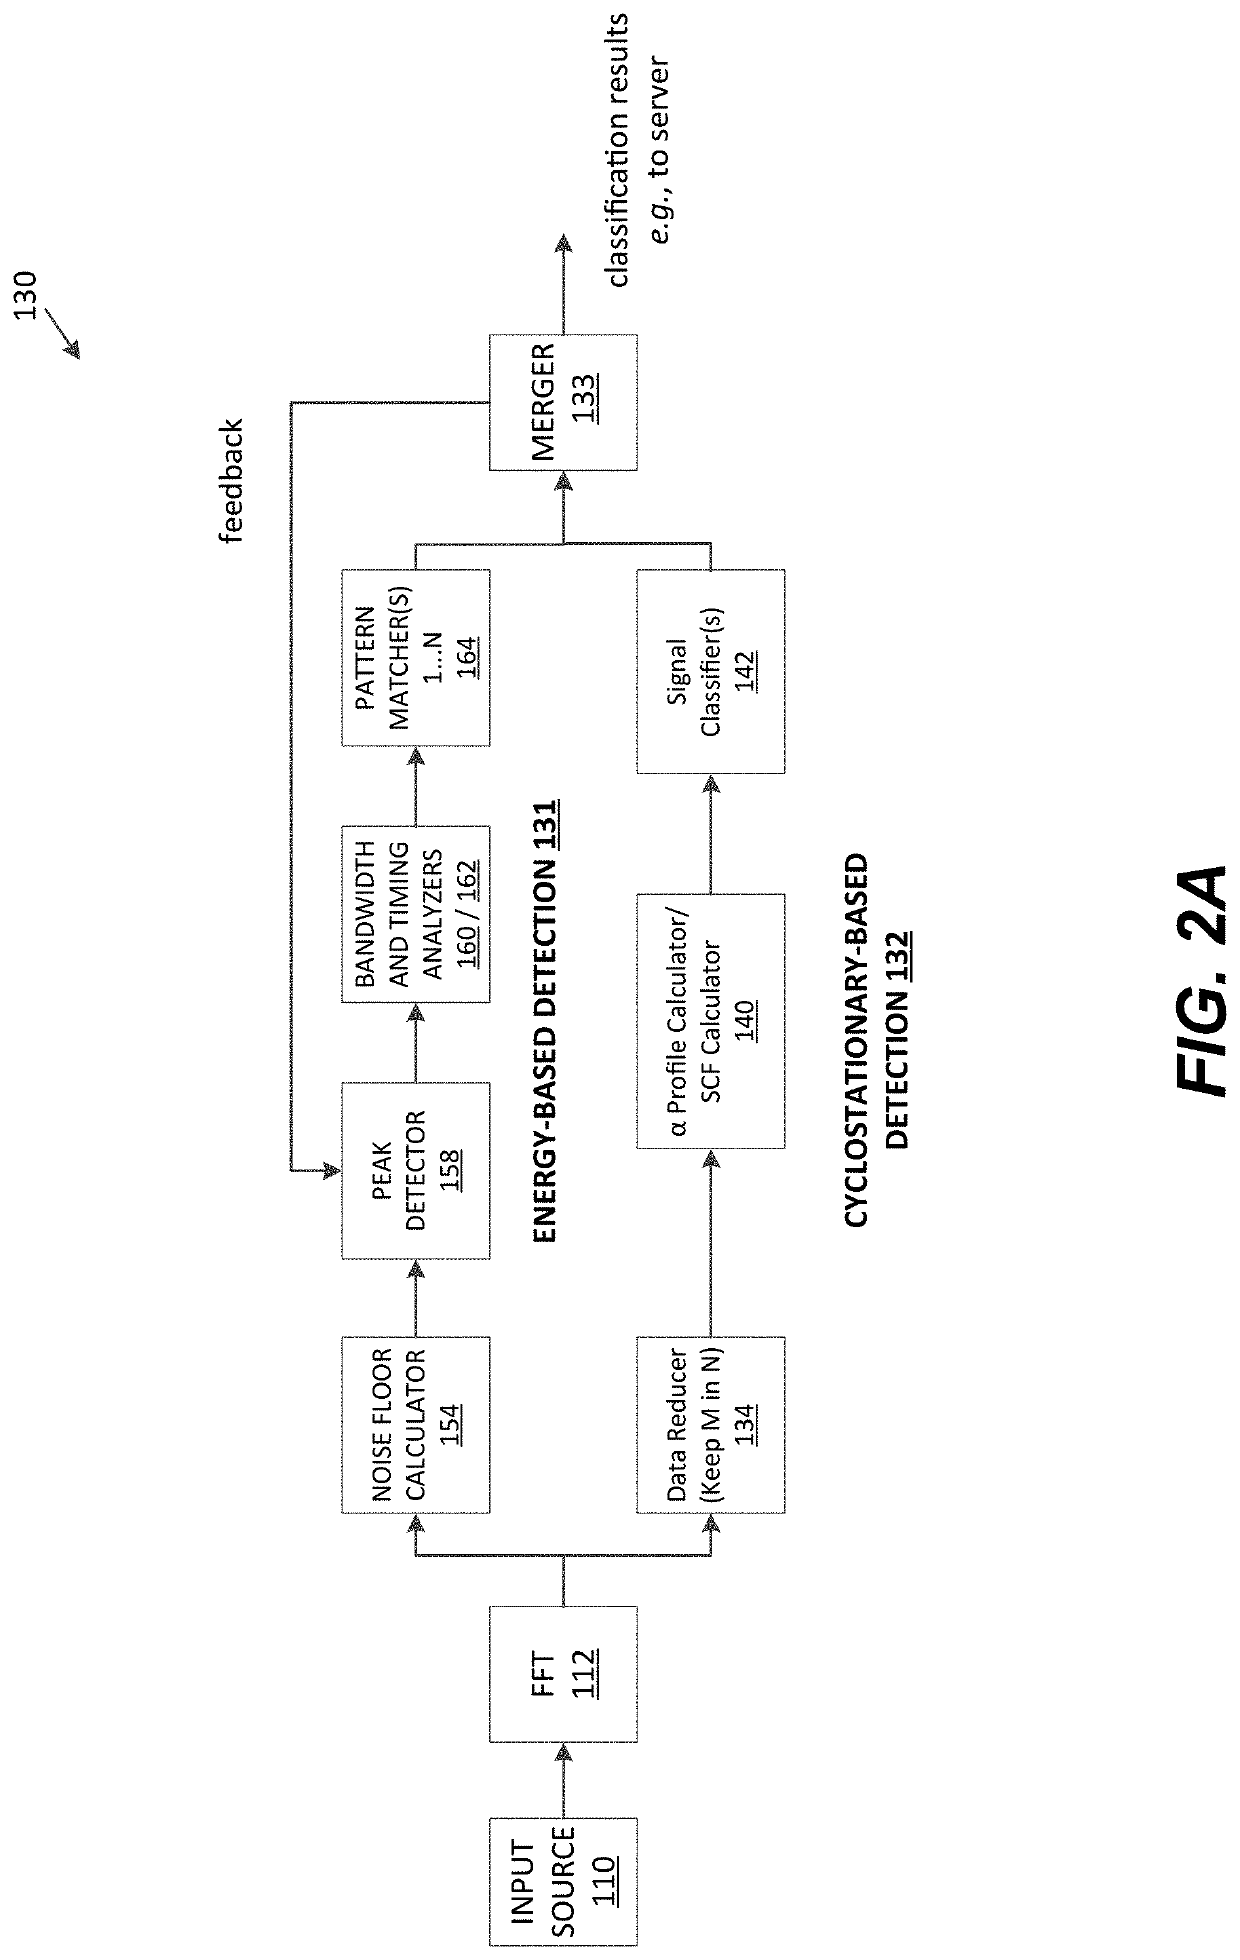 Wirless signal monitoring and analysis, and related methods, systems, and devices